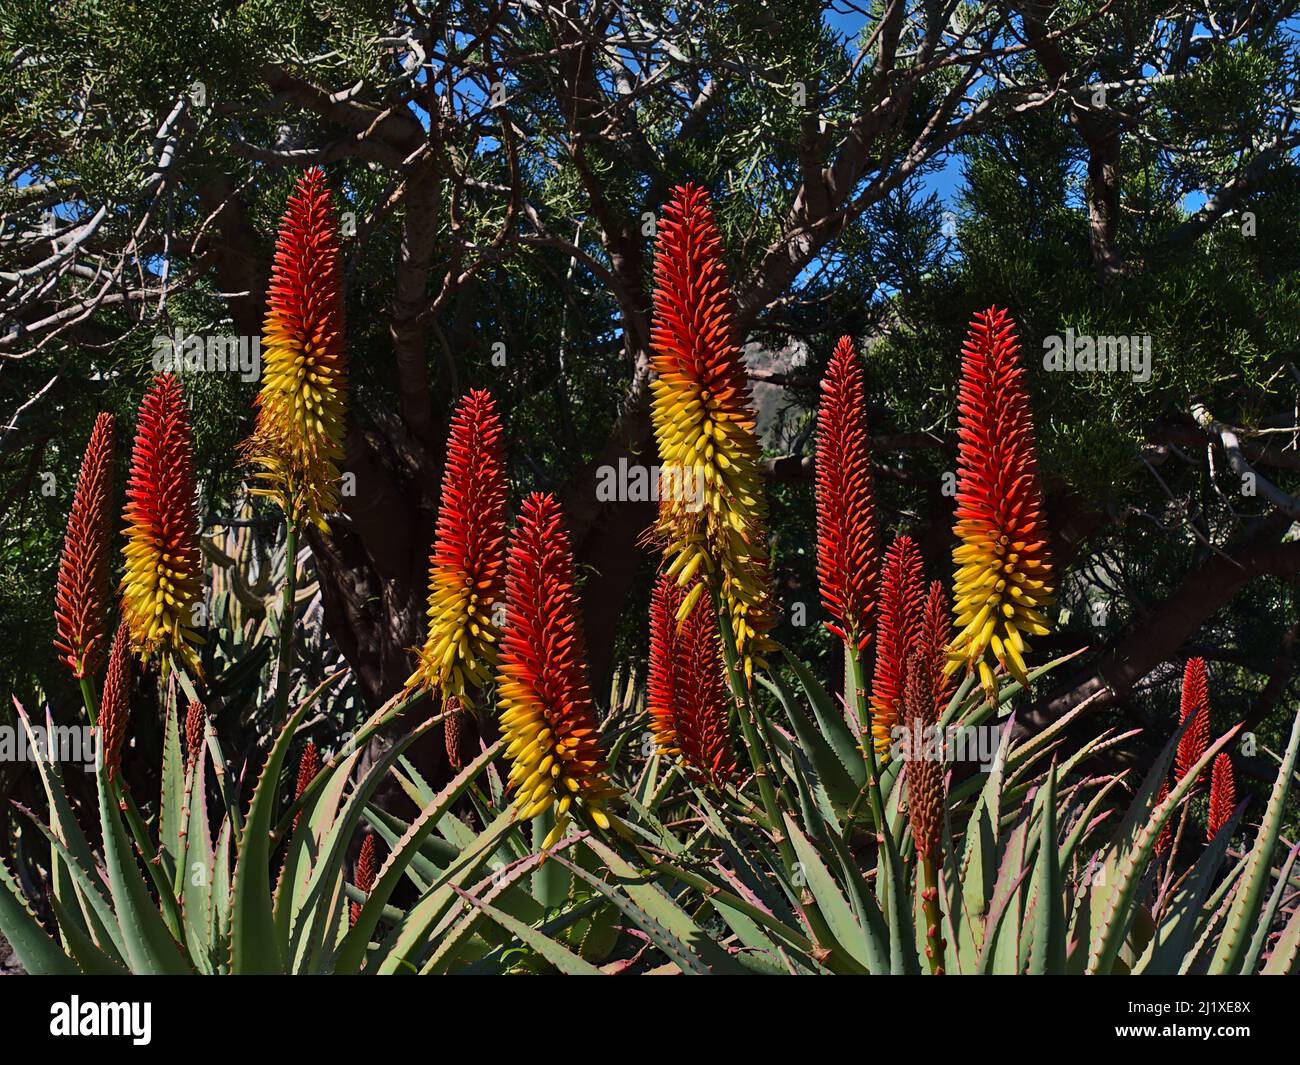 Close-up view of an Aloe mutabilis plant with green leaves and yellow and red colored blossom in winter season with tree in background on sunny day. Stock Photo